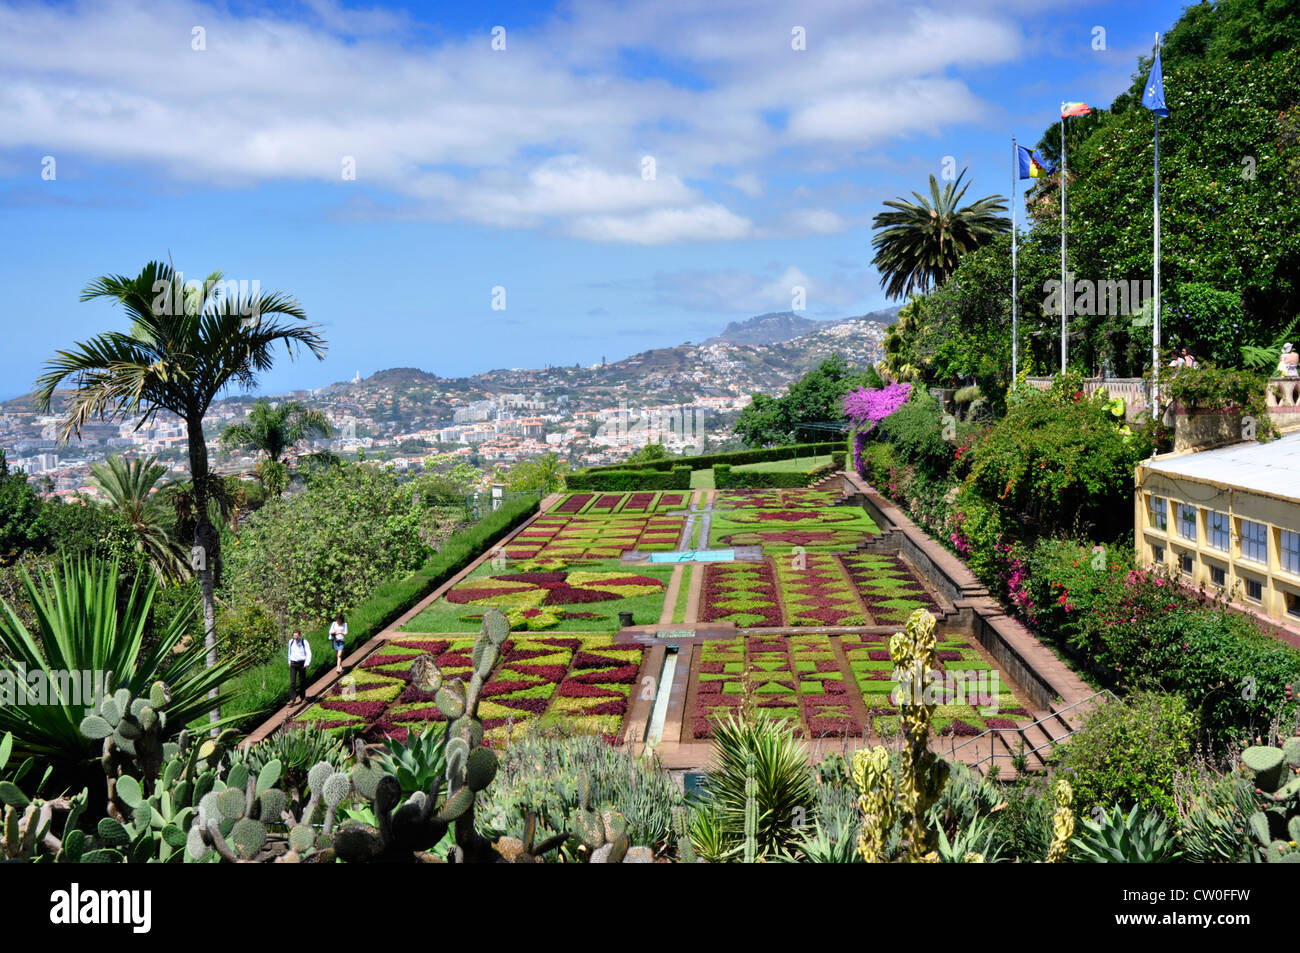 Portugal - Maderira island - hillside above Funchal - the Botanical gardens - exotic and colourful - superb views down to sea Stock Photo